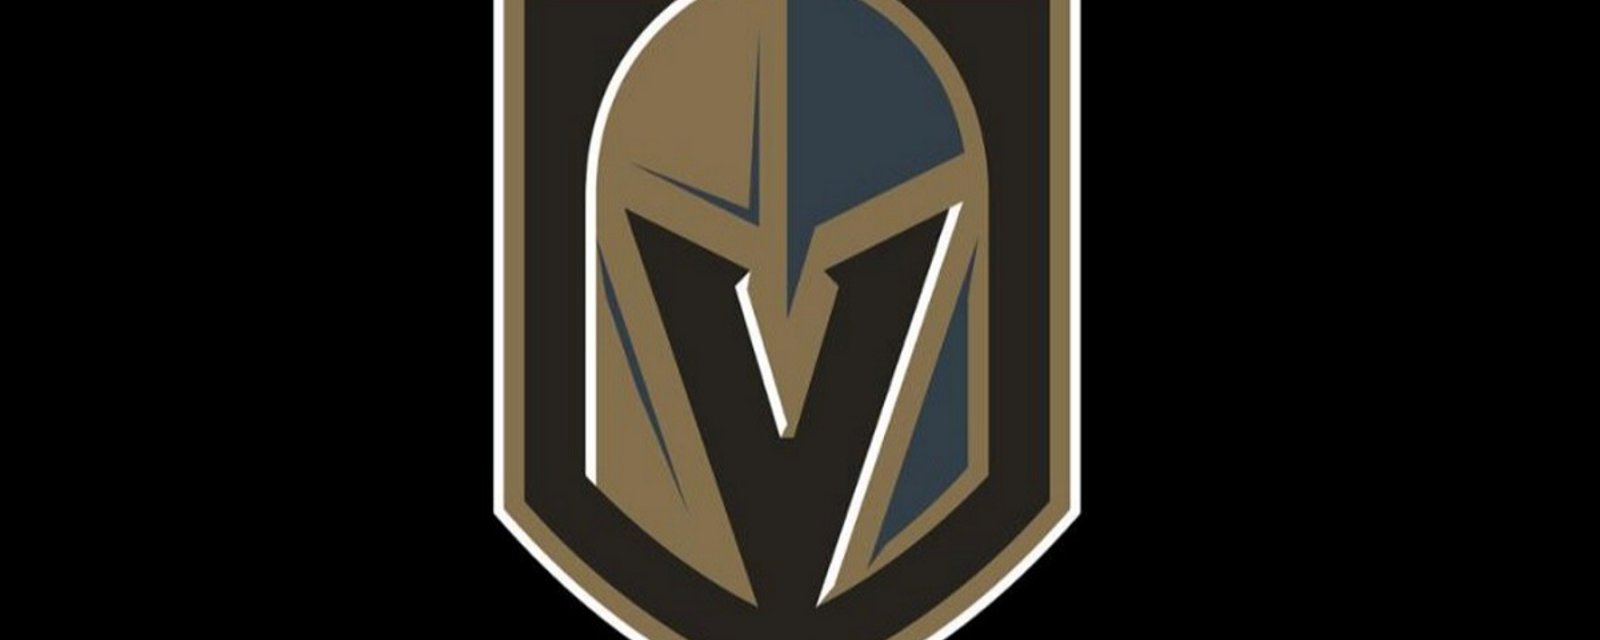 Breaking: The Golden Knights have introduced their first ever mascot!